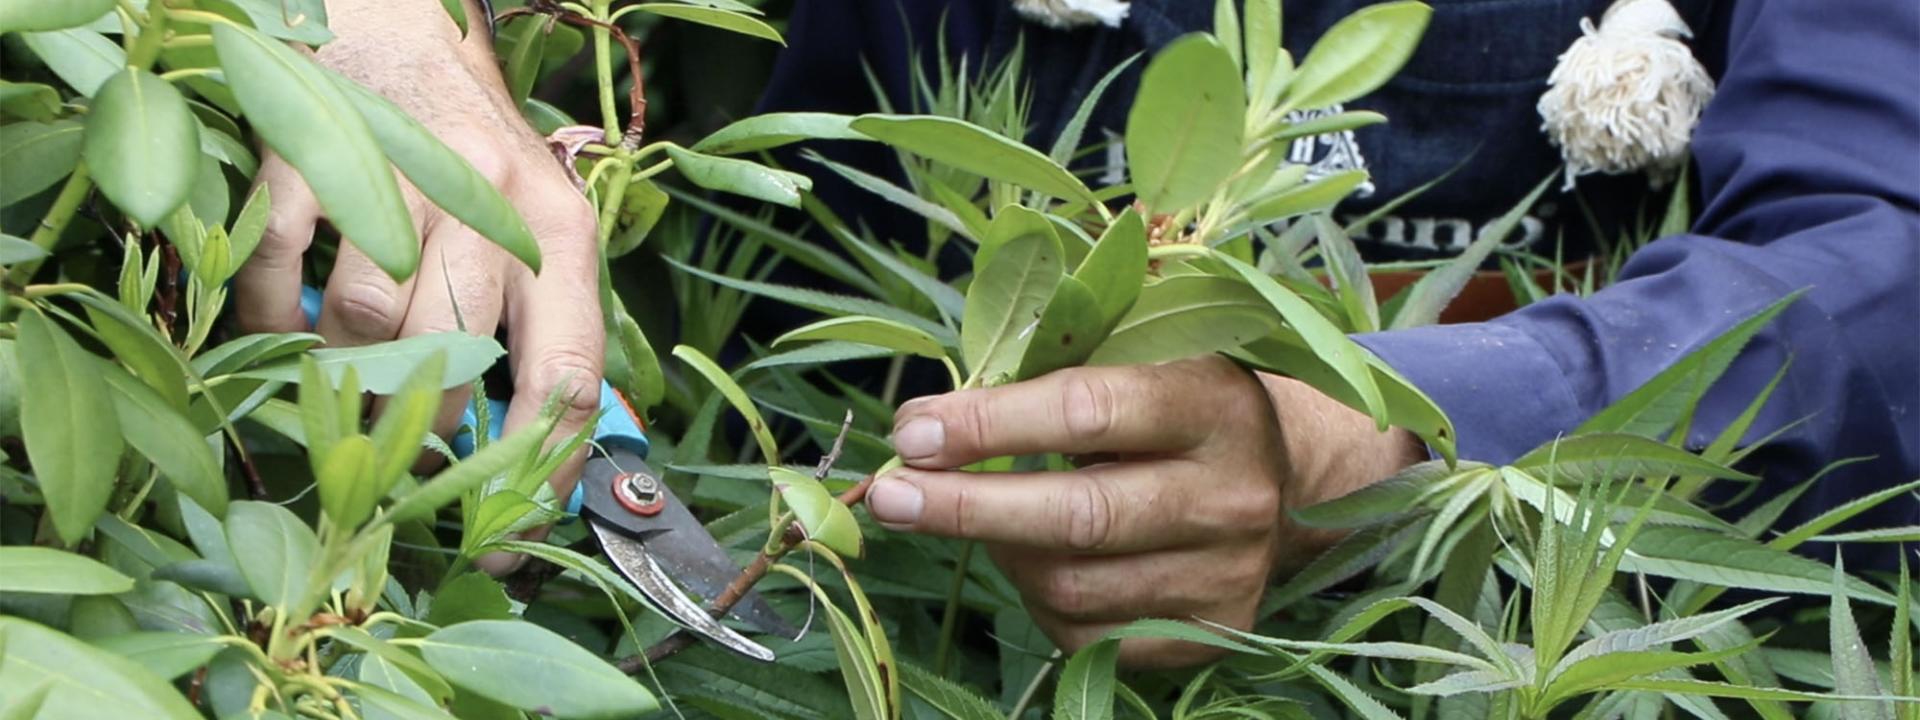 Pruning rhododendrons